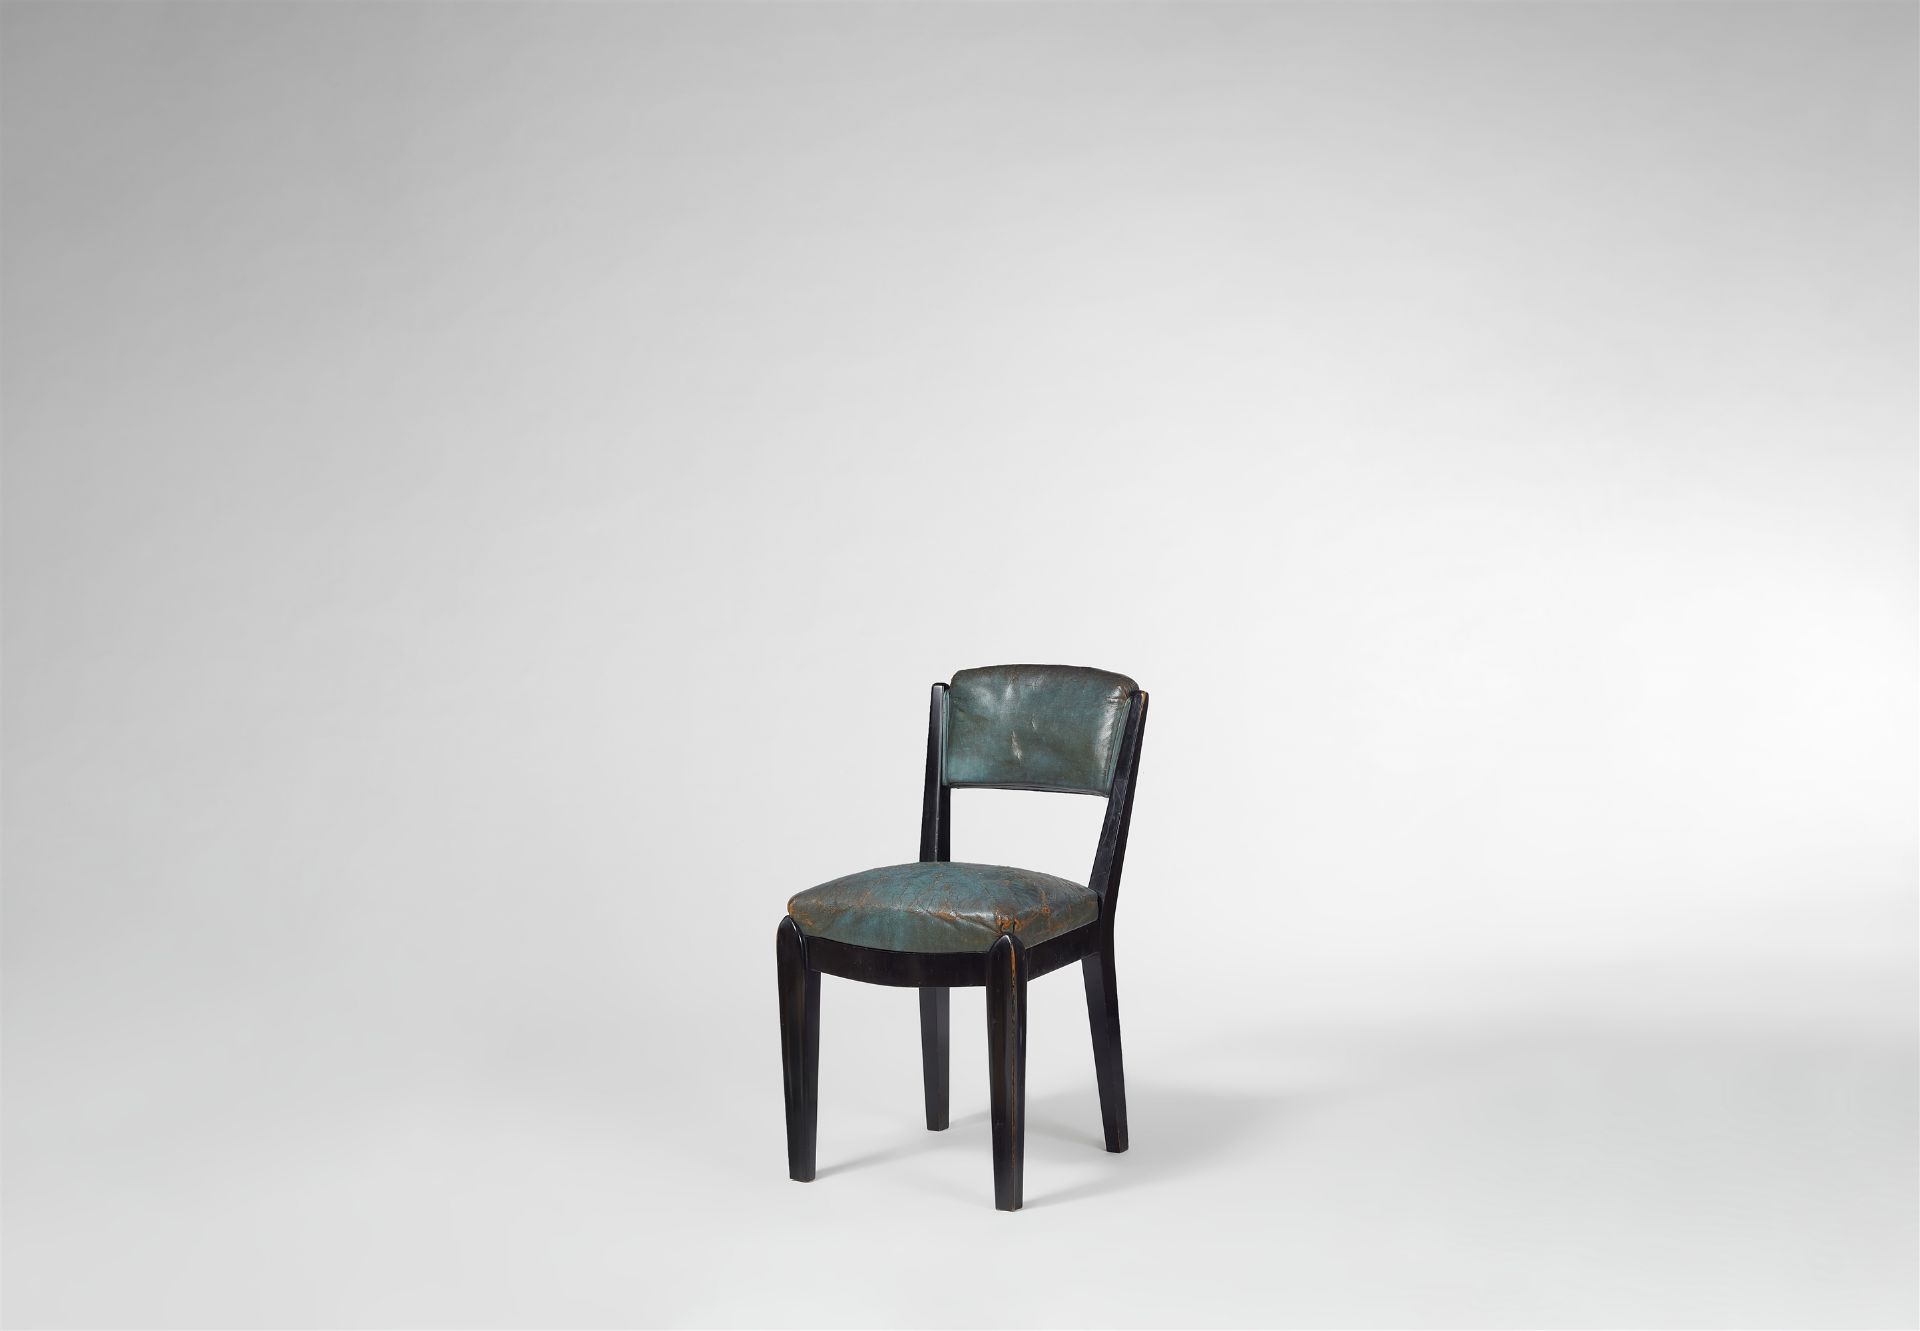 Chair , Attributed to Henry van de Velde or his circle